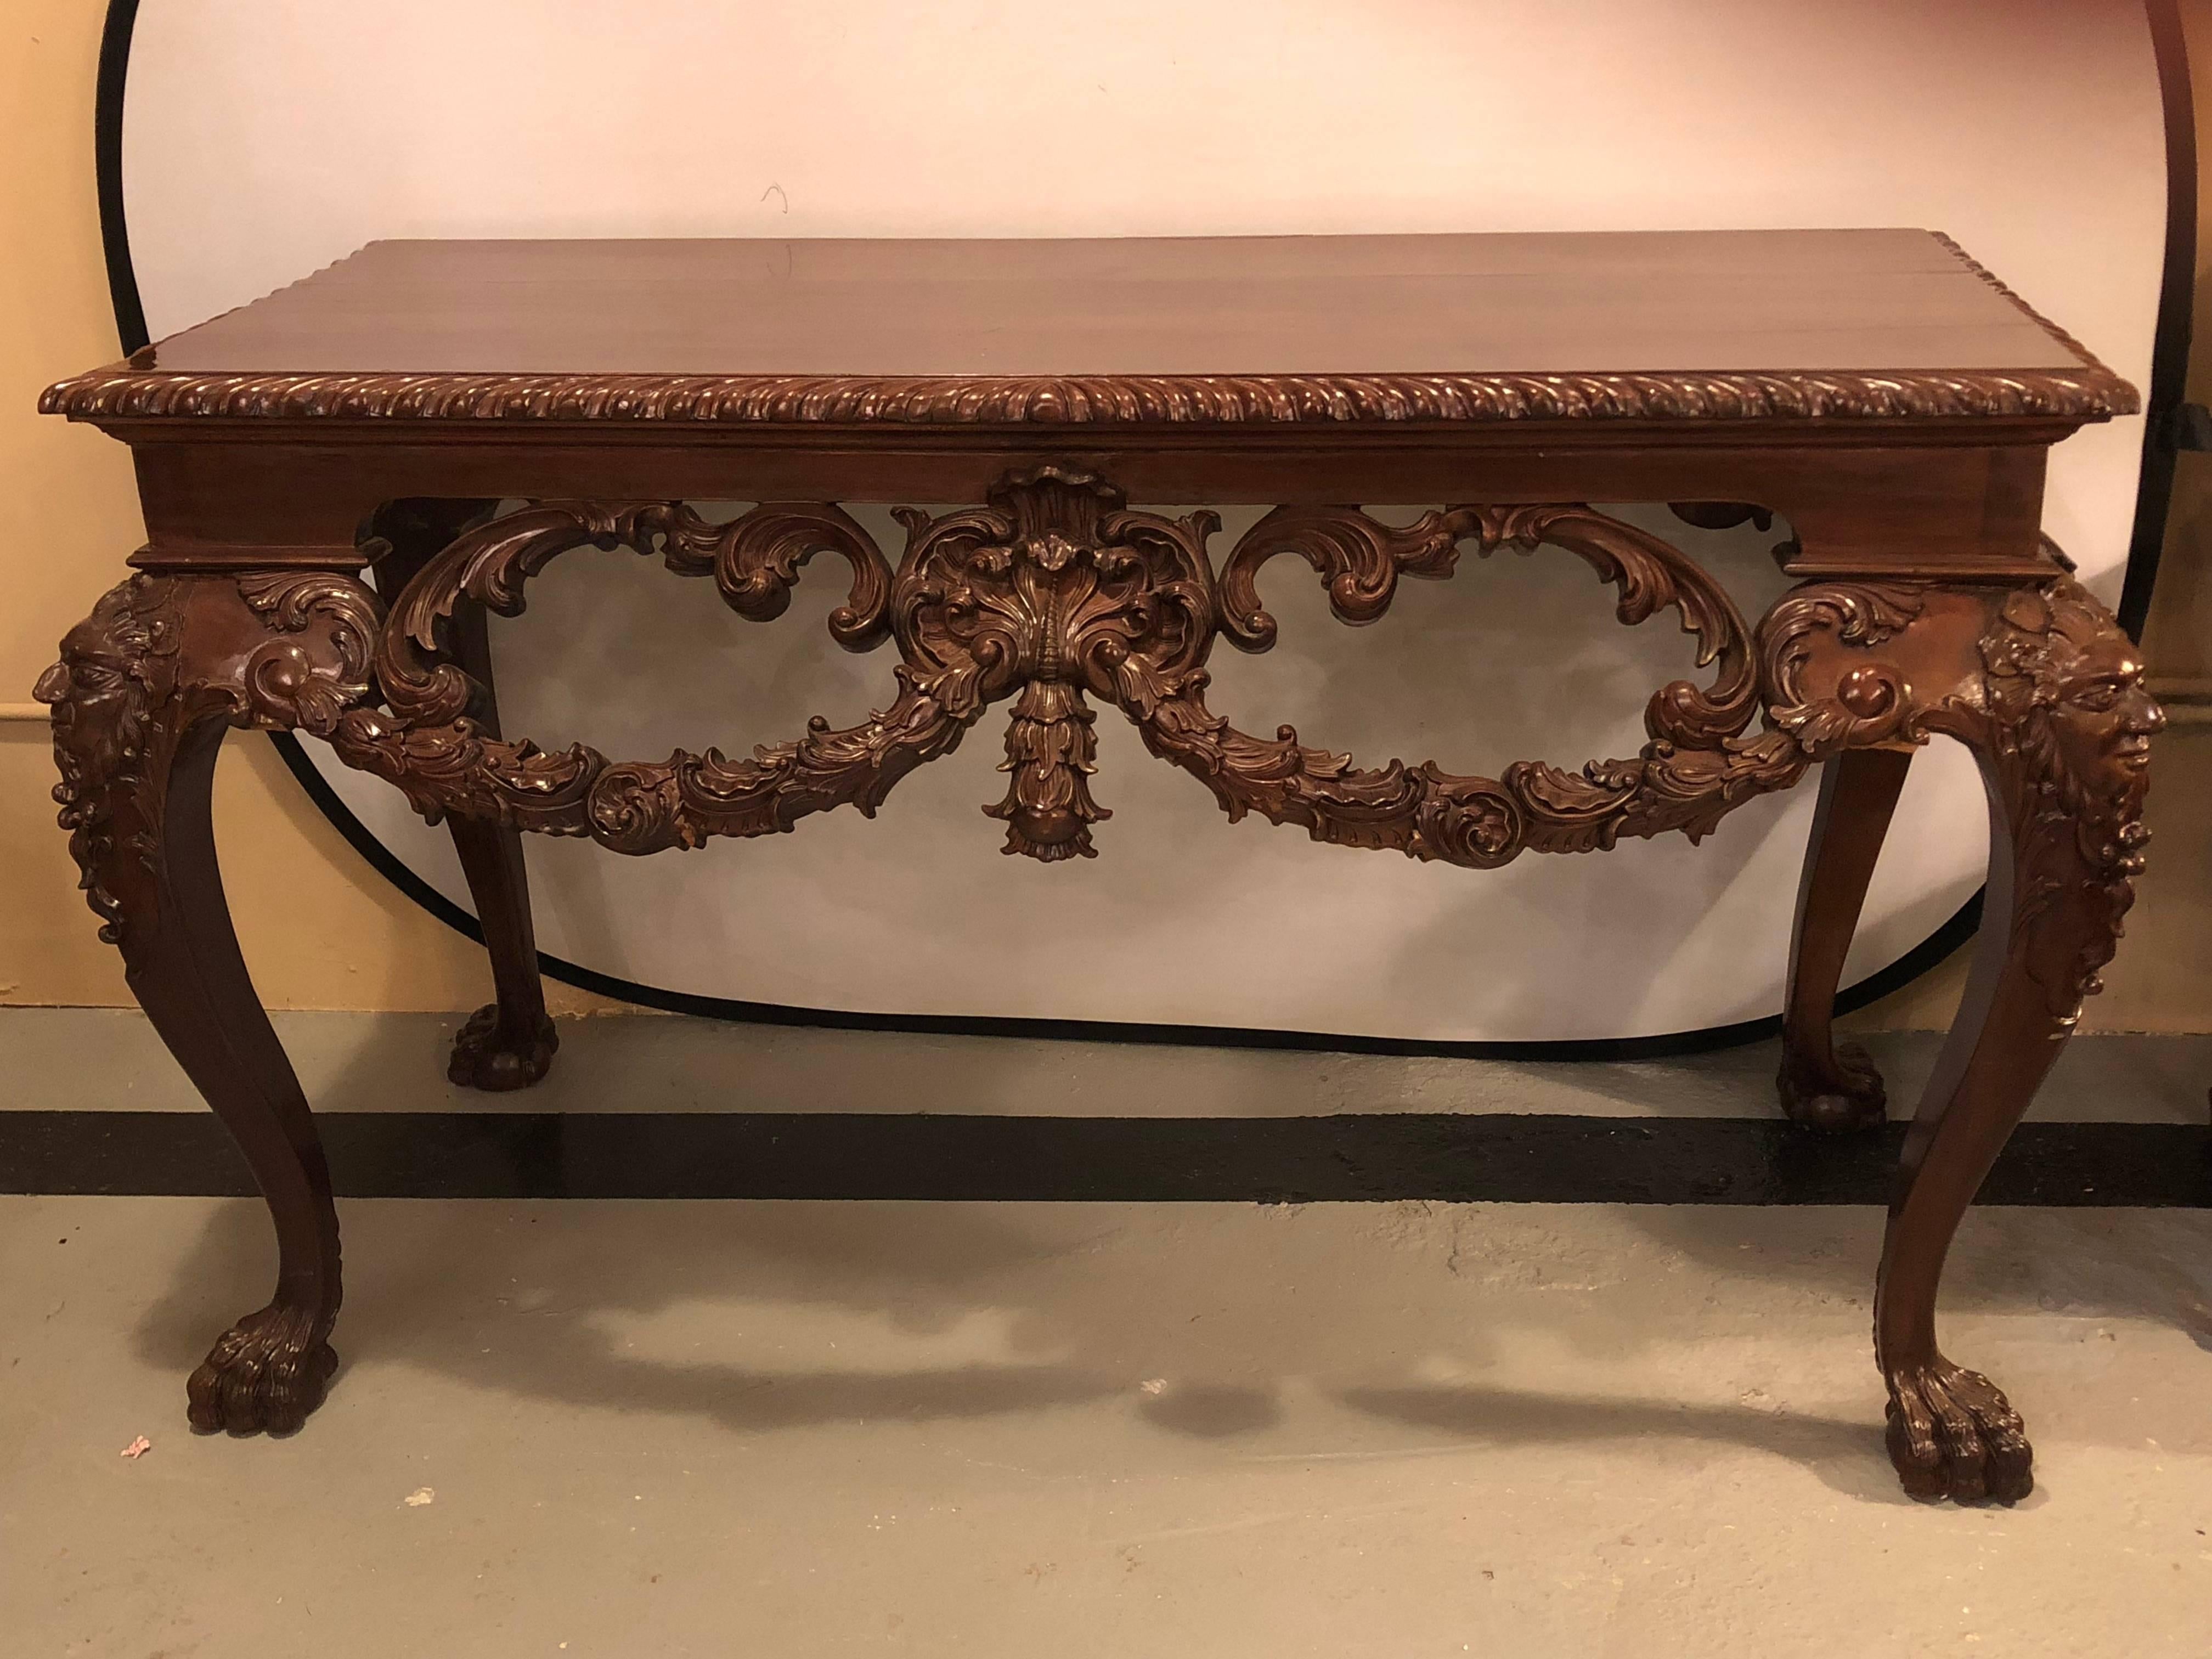 A custom carved console table with claw feet and carved heads, circa 1940s. This finely carved and detailed console or sofa table has Horner brothers quality wood work.